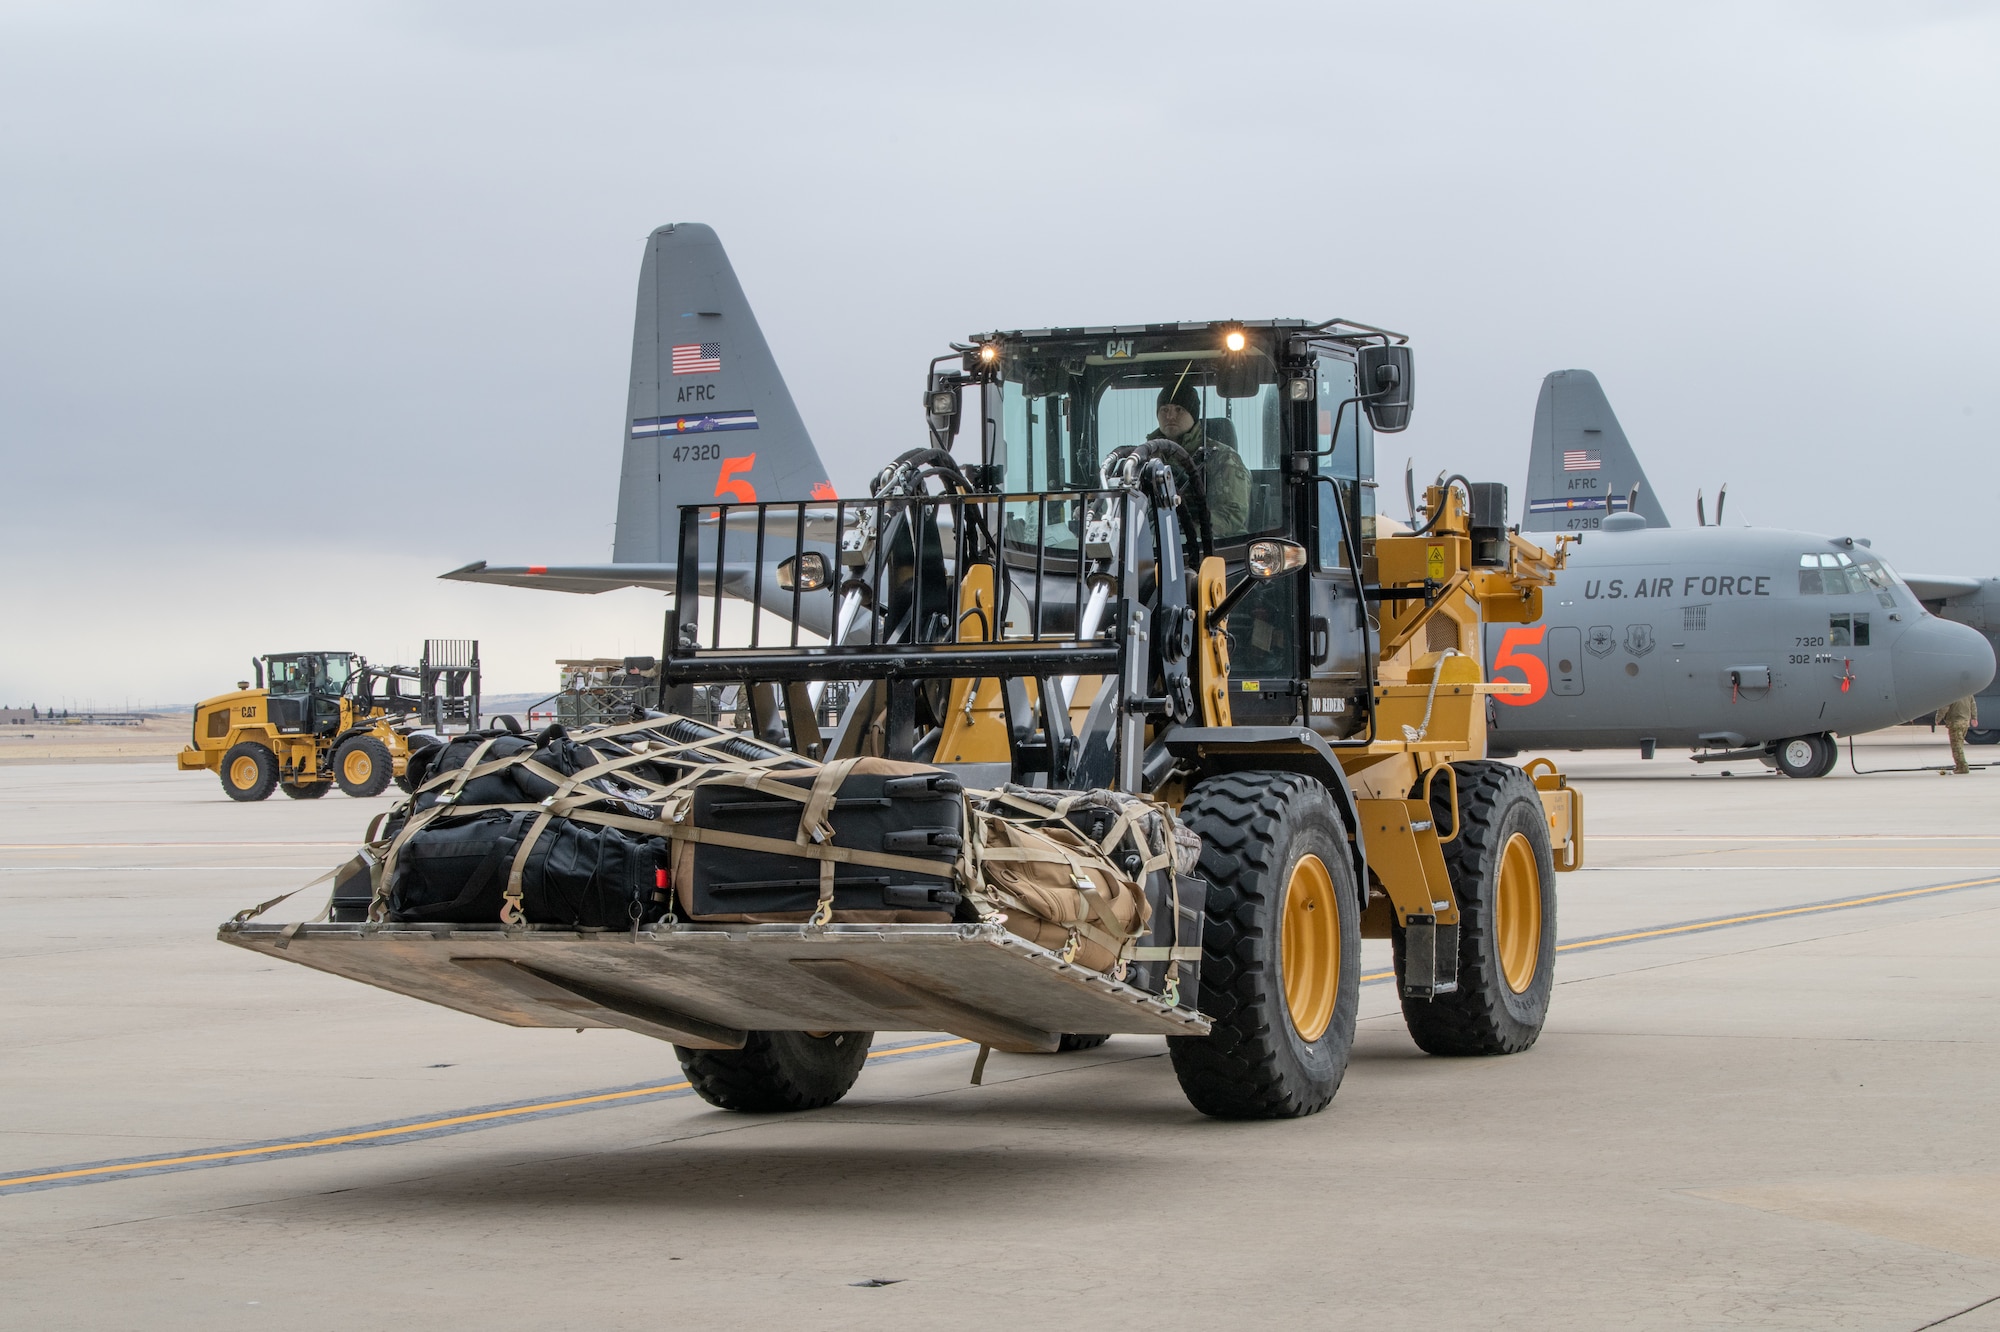 Large forklift carrying heavy pallet drives toward camera with military plane in the background